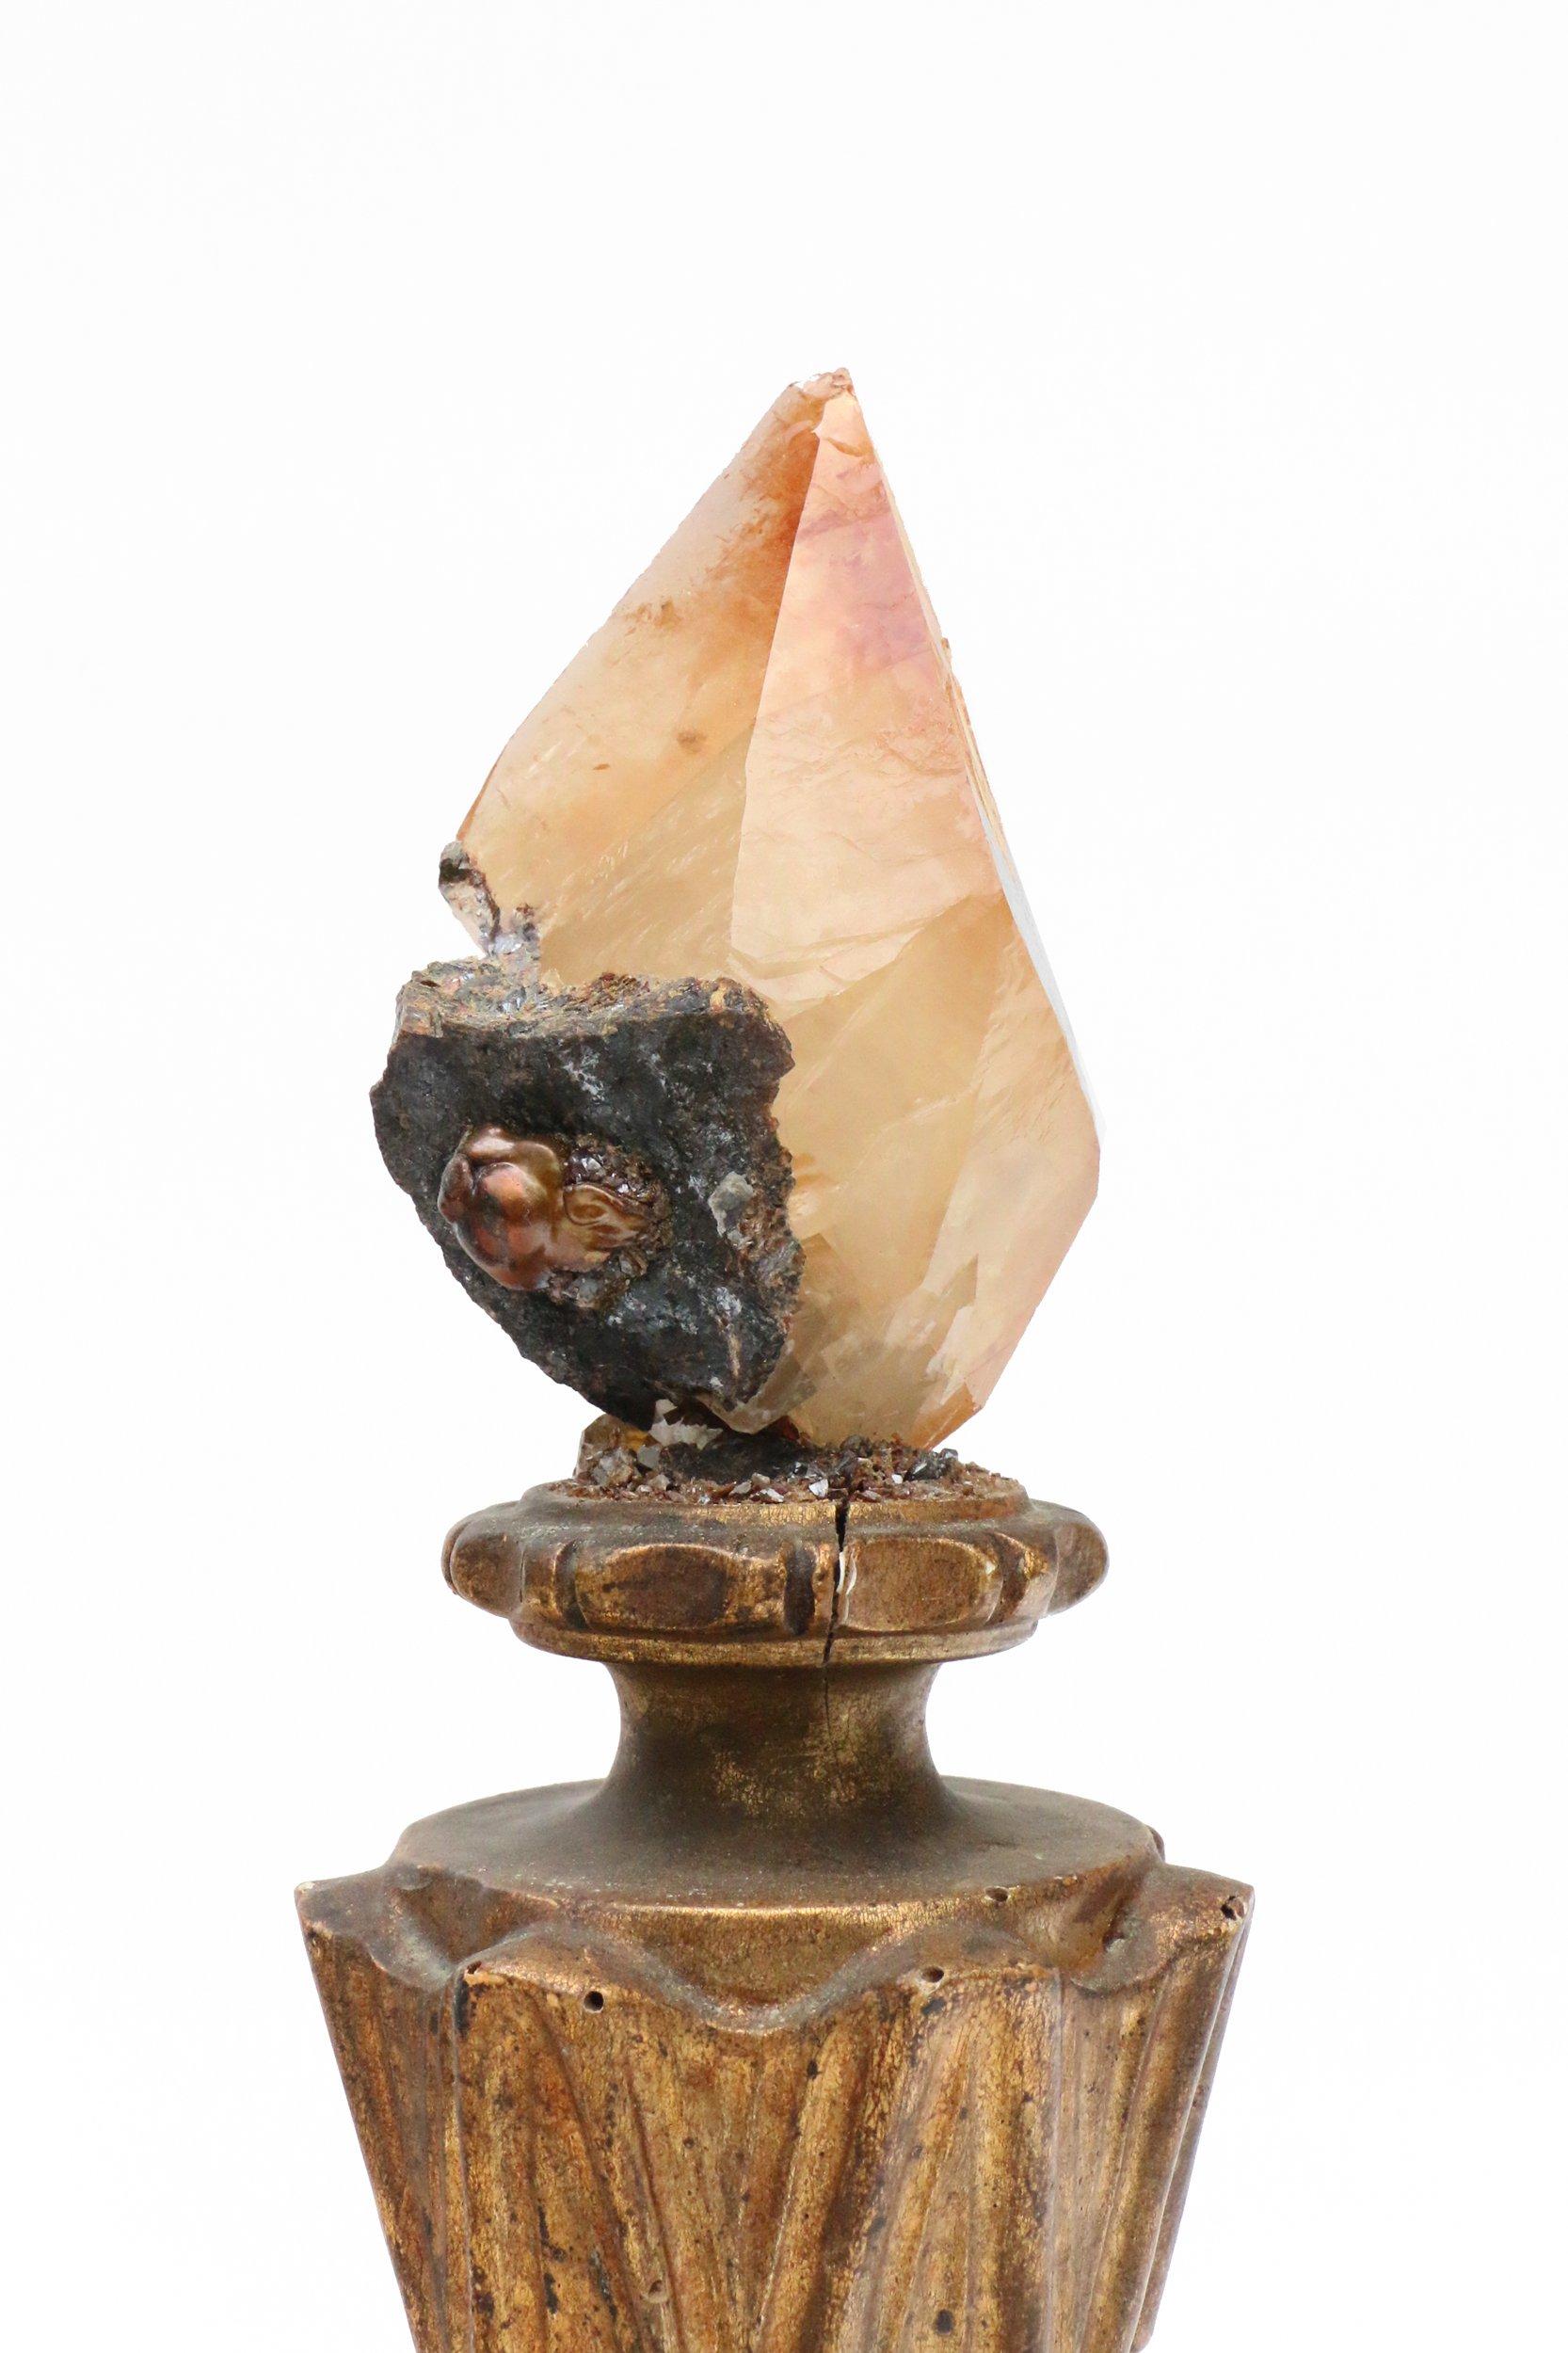 Late 19th century Art Deco style Italian vase with a calcite crystal point with sphalerite and a Baroque pearl. The hand carved vase is from Lazio, Italy and is a good example of an unusual and early Italian Art Deco style in its shape and